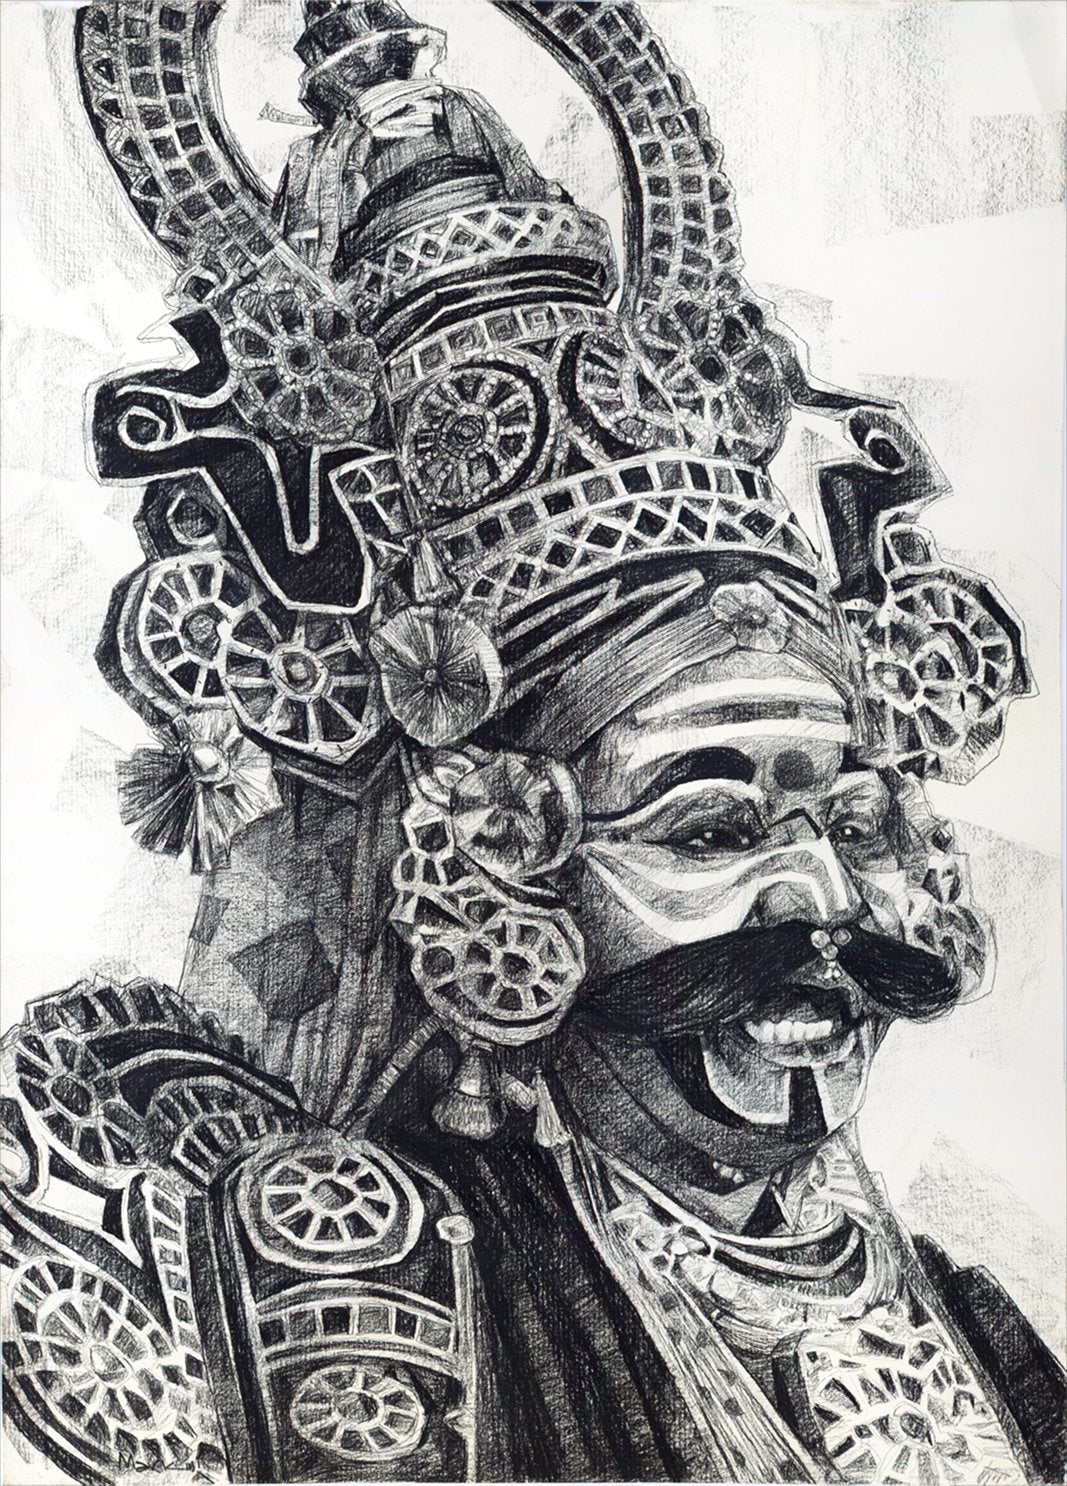 Performer 355|S. Mark Rathinaraj- Charcoal on Board, , 39 x 28 inches